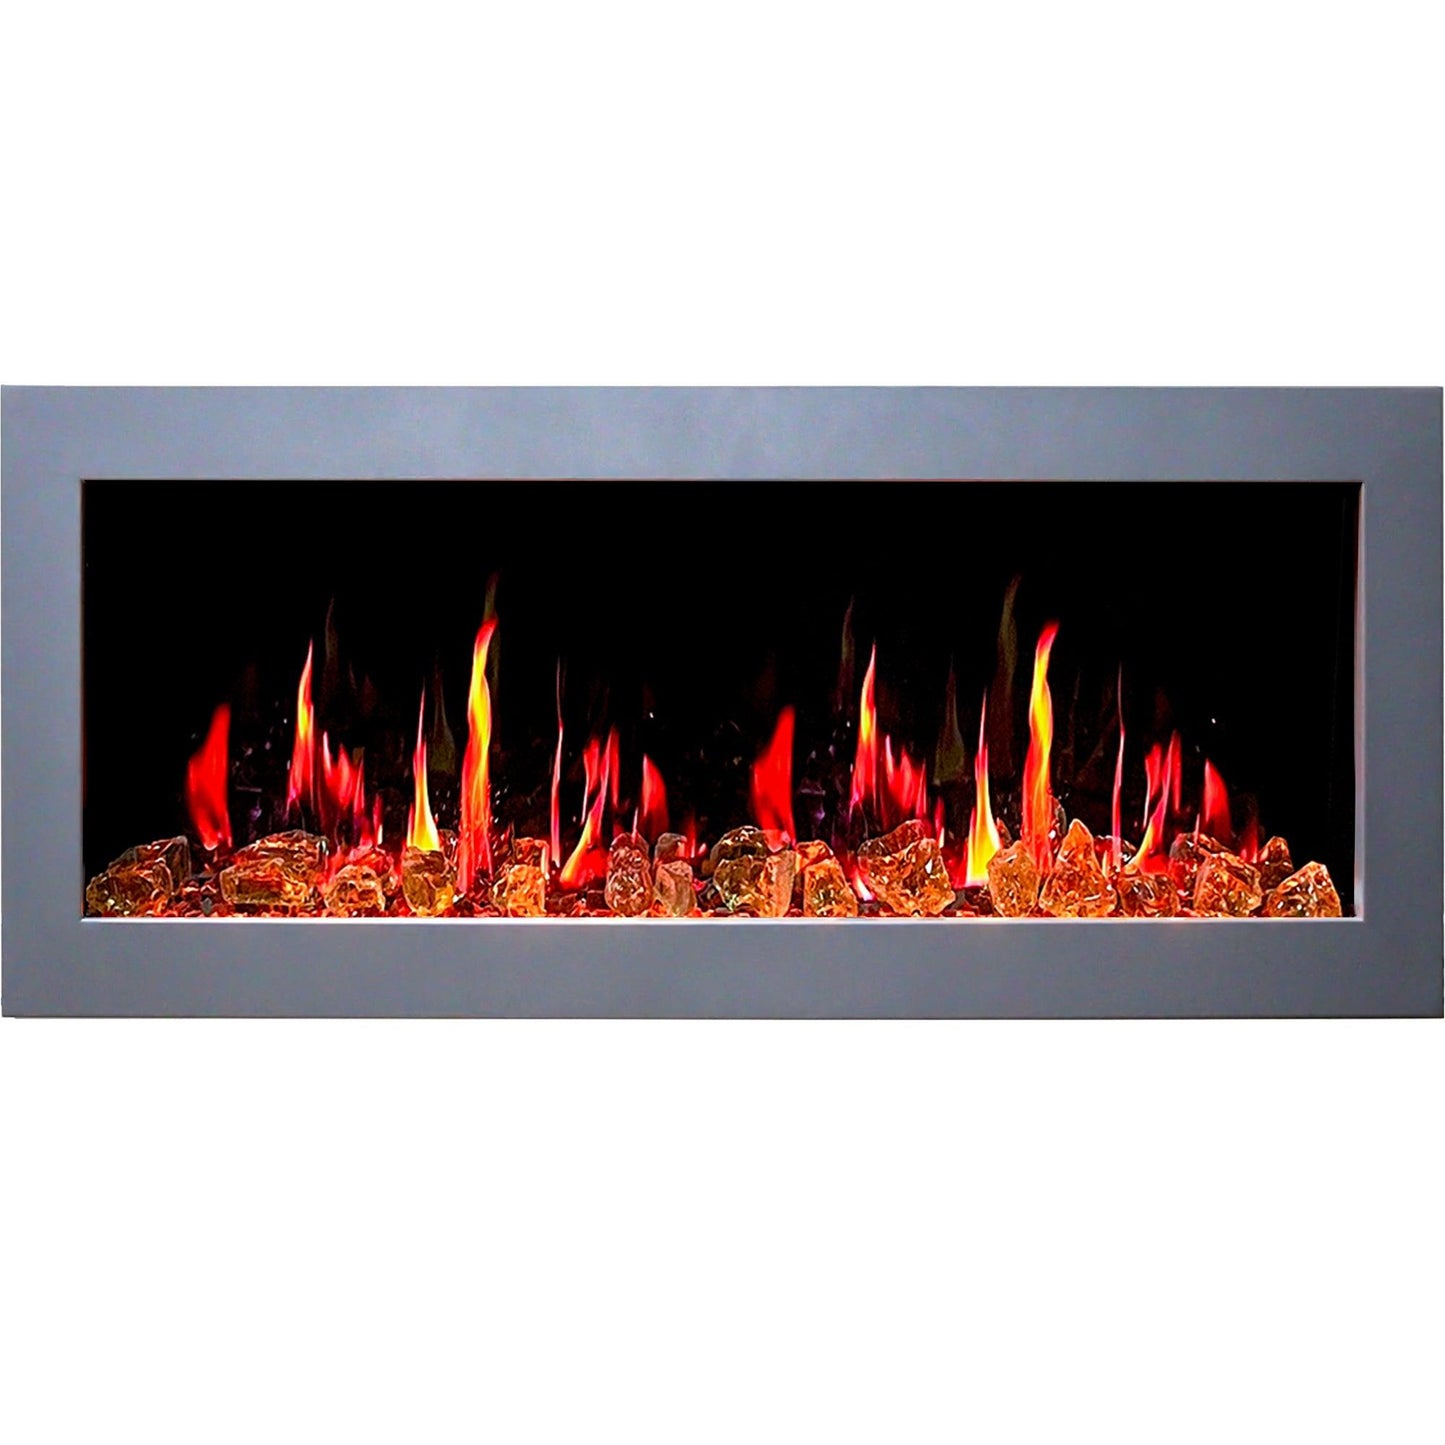 ZopaFlame™ 47" Linear Wall-mount Electric Fireplace - SG17488X - ZopaFlame Fireplaces